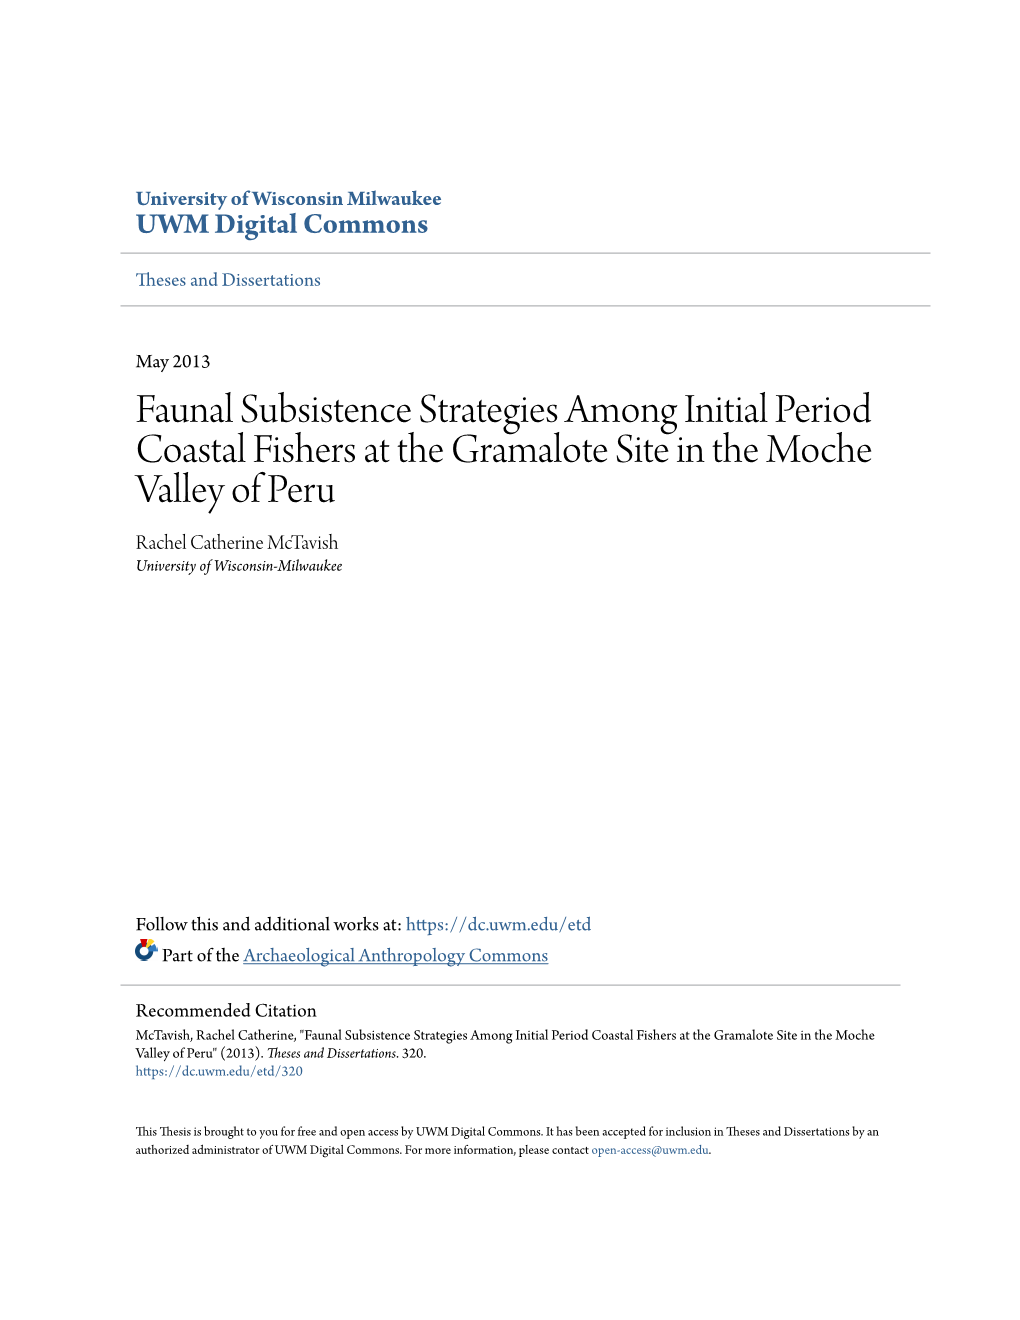 Faunal Subsistence Strategies Among Initial Period Coastal Fishers at The